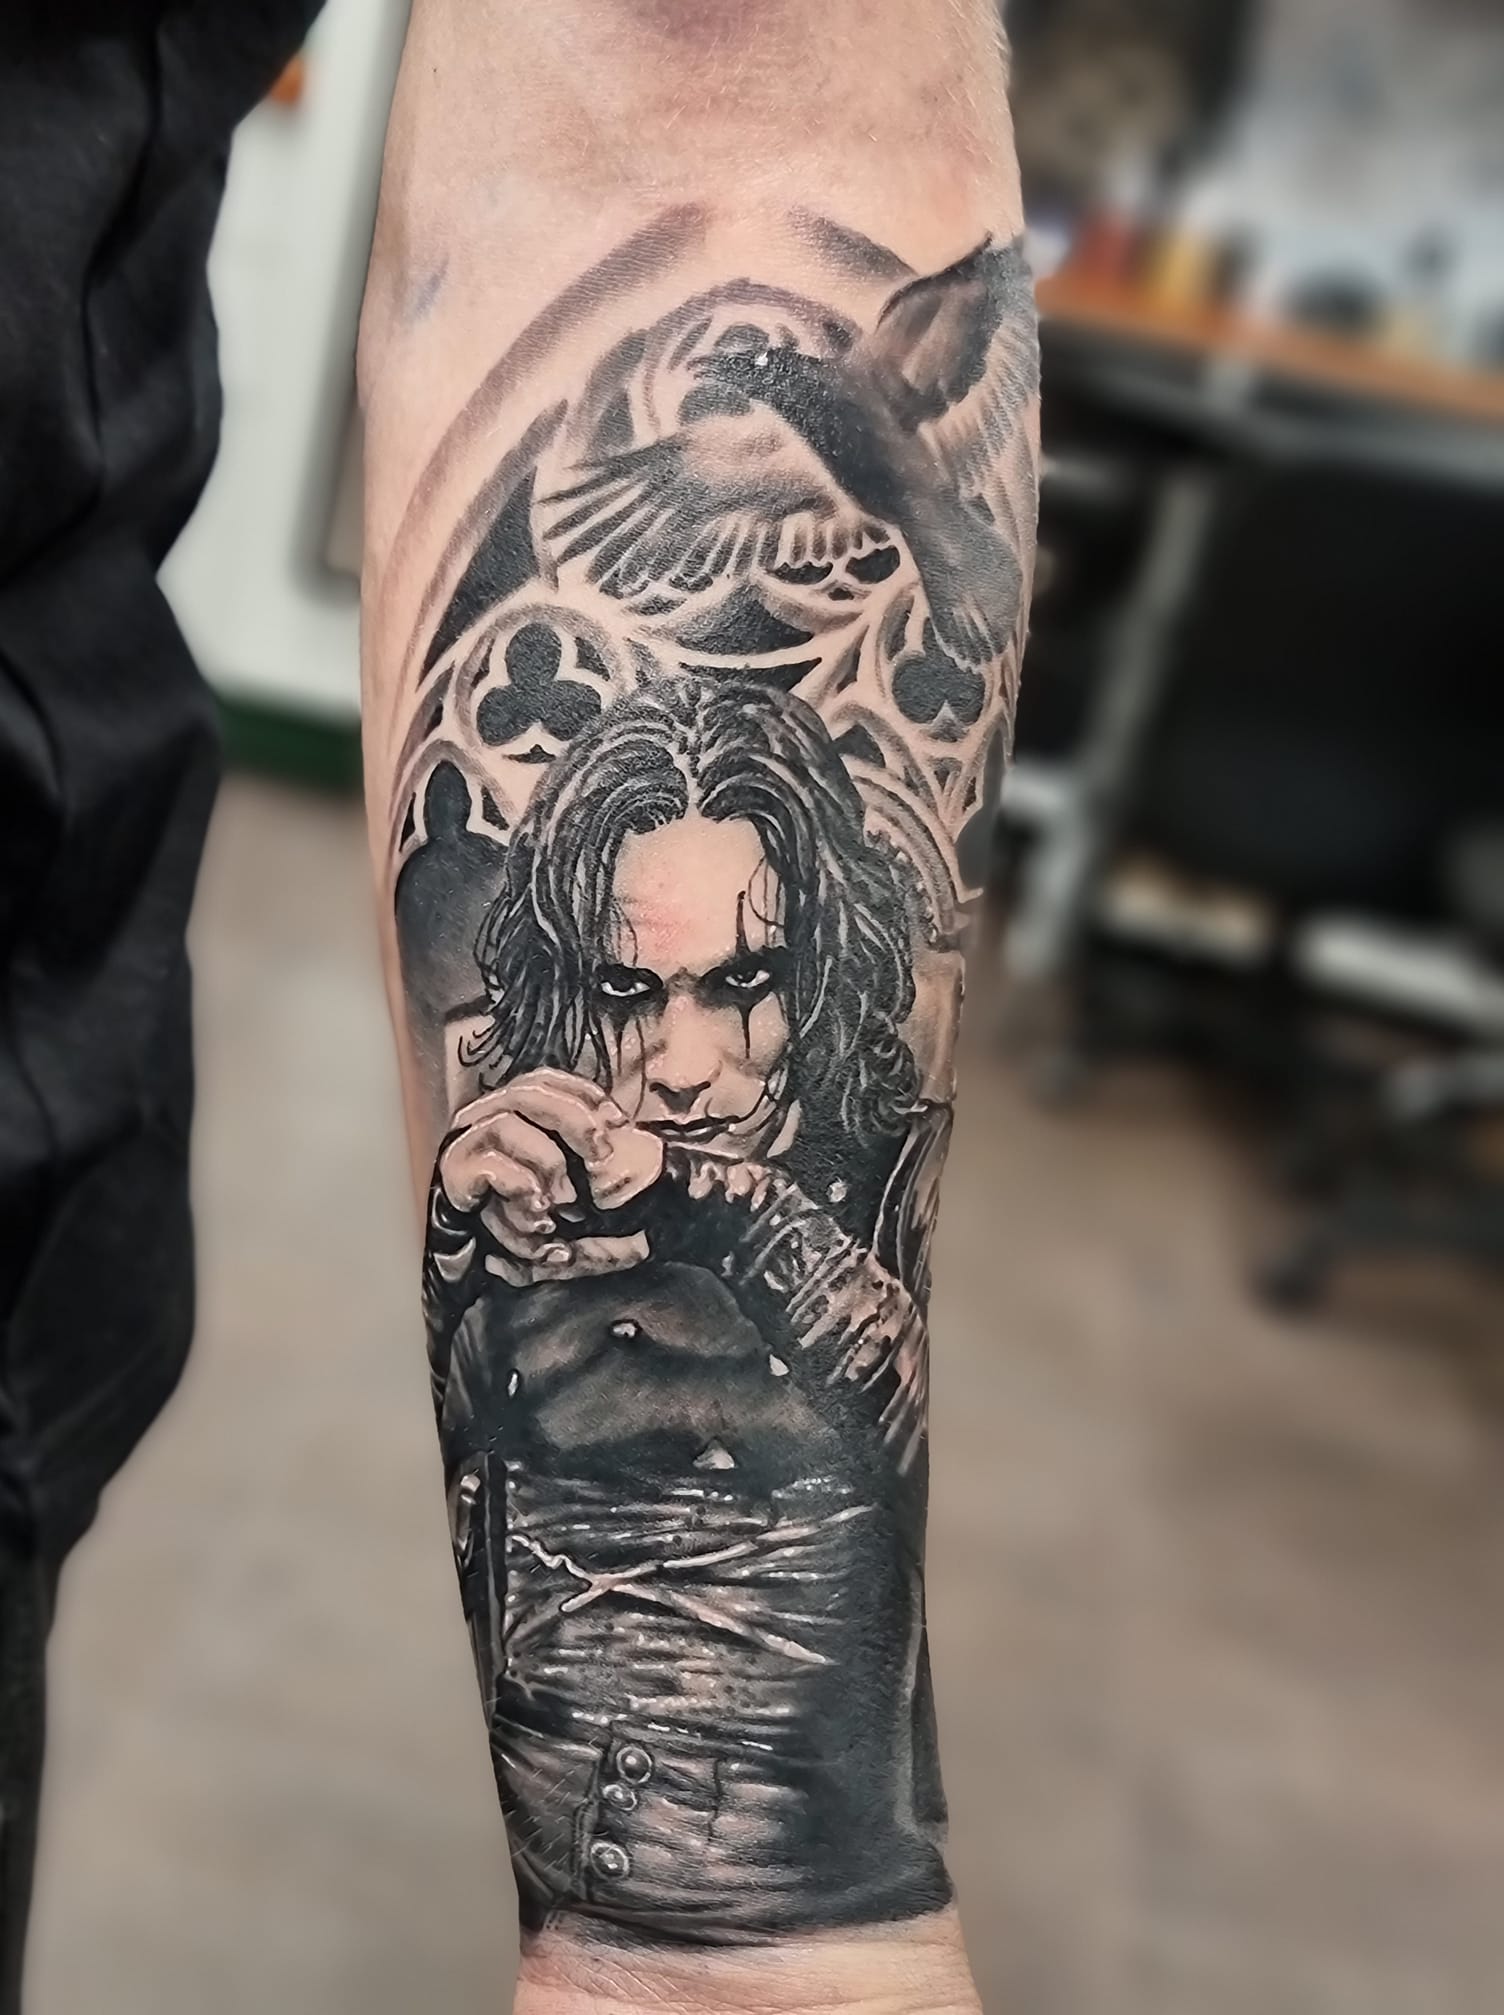 Excellent movie tattoo on forearm by Levi Bell